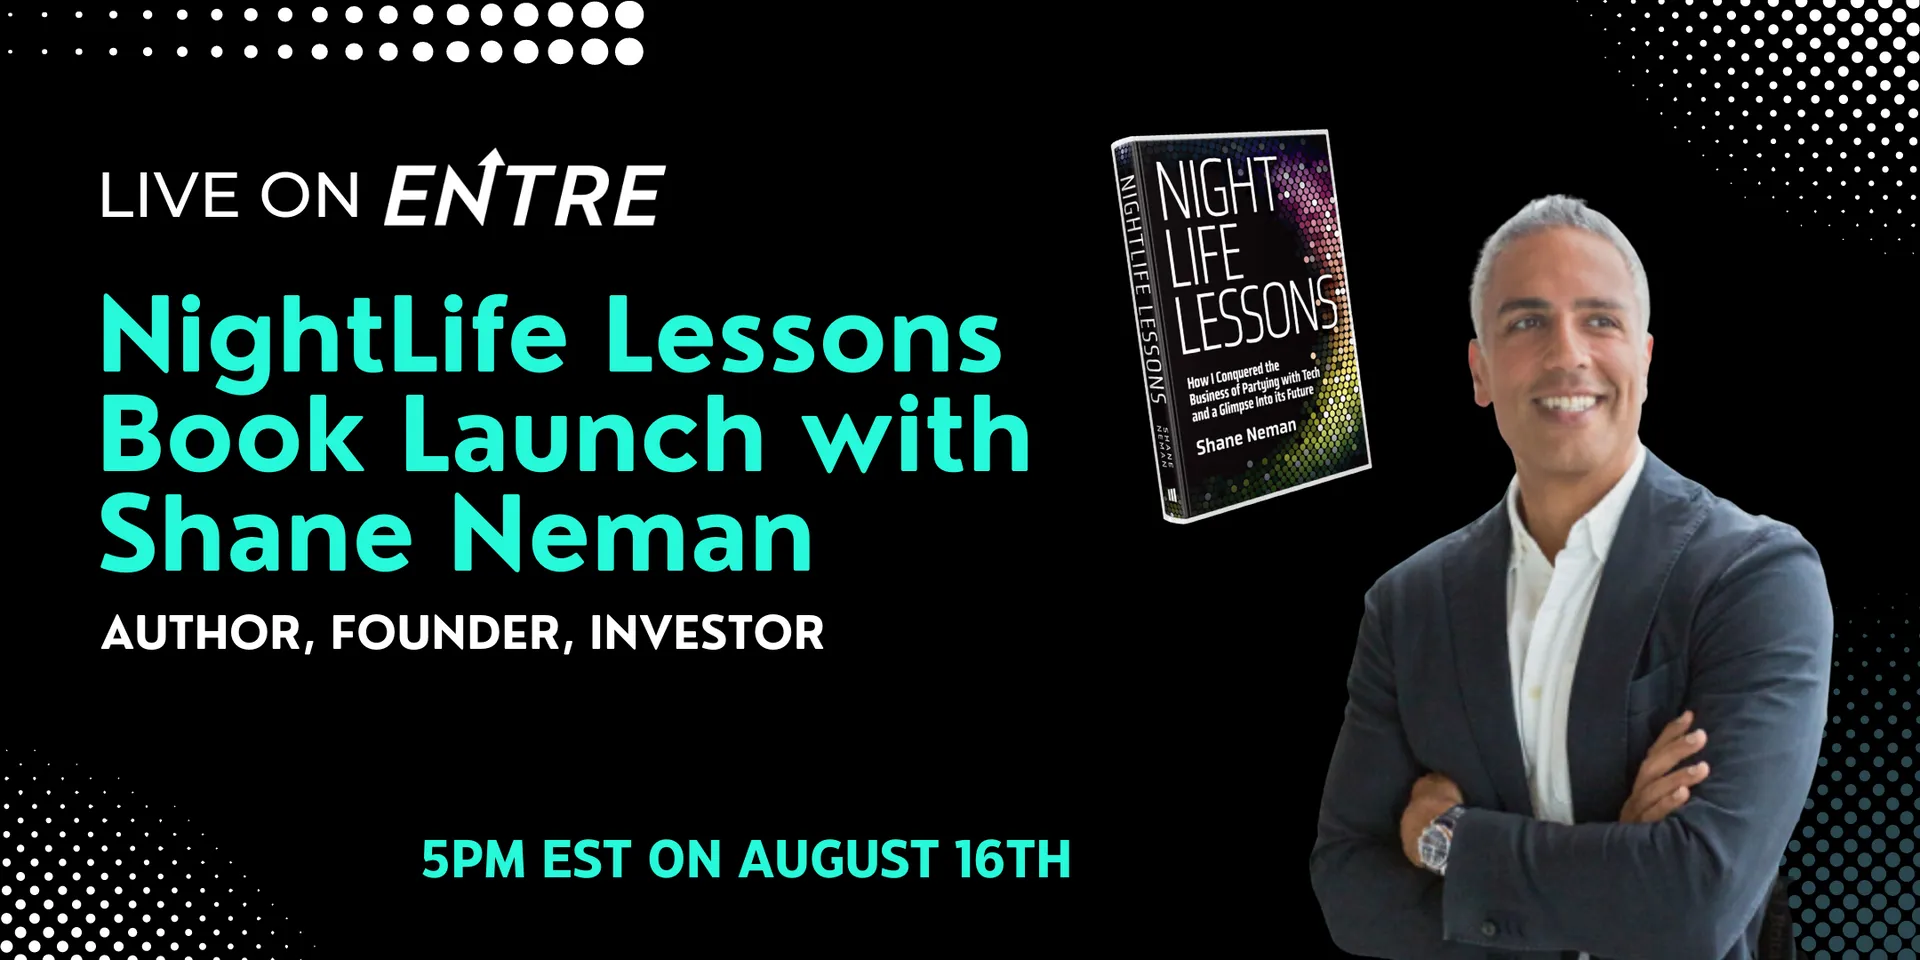 Join us in hosting serial entrepreneur <@5xIgp7NjAnfJO7J6cXpRvl4sBmY2> for the launch of his book 🚀

August 16th at 5pm EST 🗓️

RSVP here 👉 https://joinentre.com/event/5efea1a2-d3cb-42f6-9710-0c43eefbc69e

 🚨Stay tuned throughout the event because a lucky audience member will be receiving a free copy of Shane's new book 'NightLife Lessons' 🎁